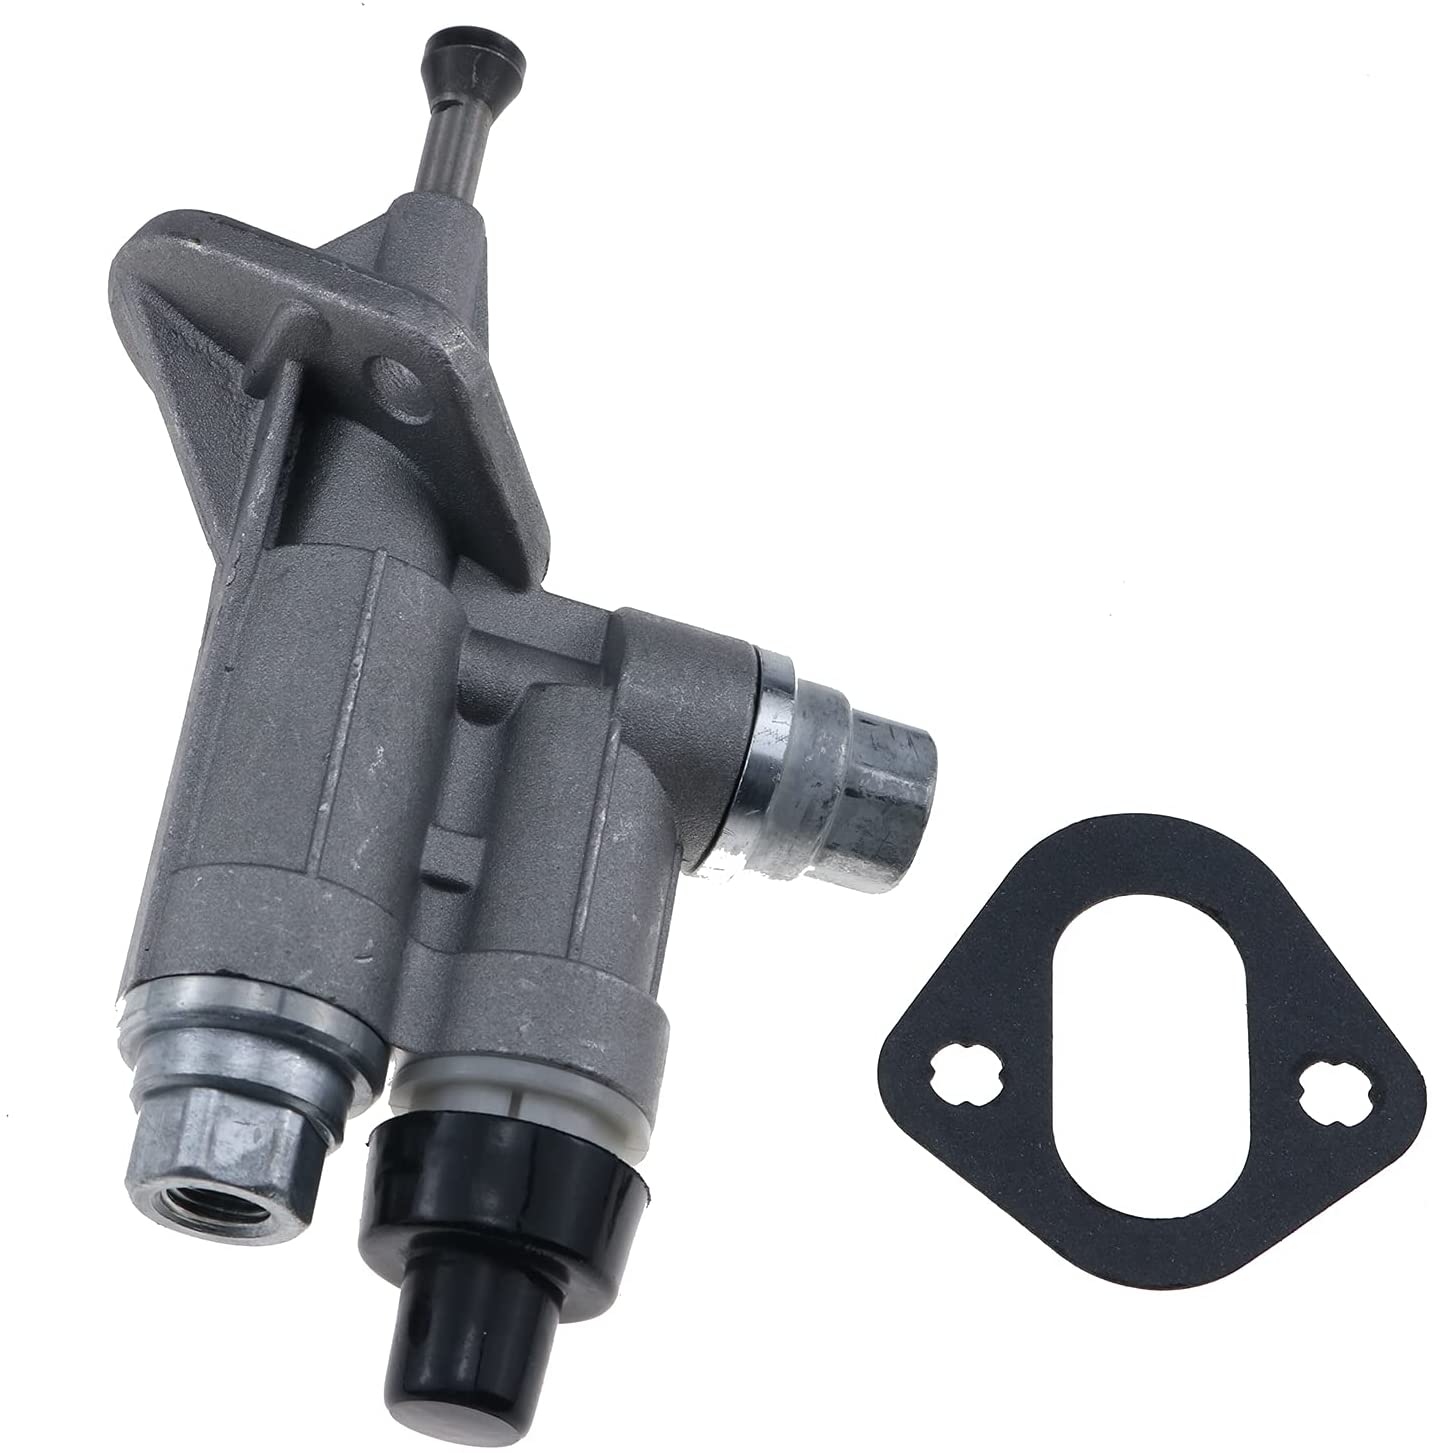 Fuel Transfer Lift Pump with Gasket 3906795 3918076 4937767 3917998 Compatible with Cummins B Series 1106N1‑010 C Series 6C8.3 QSC8.3 ISC8.3 QSL9.3 8.3 Litre Engines - KUDUPARTS